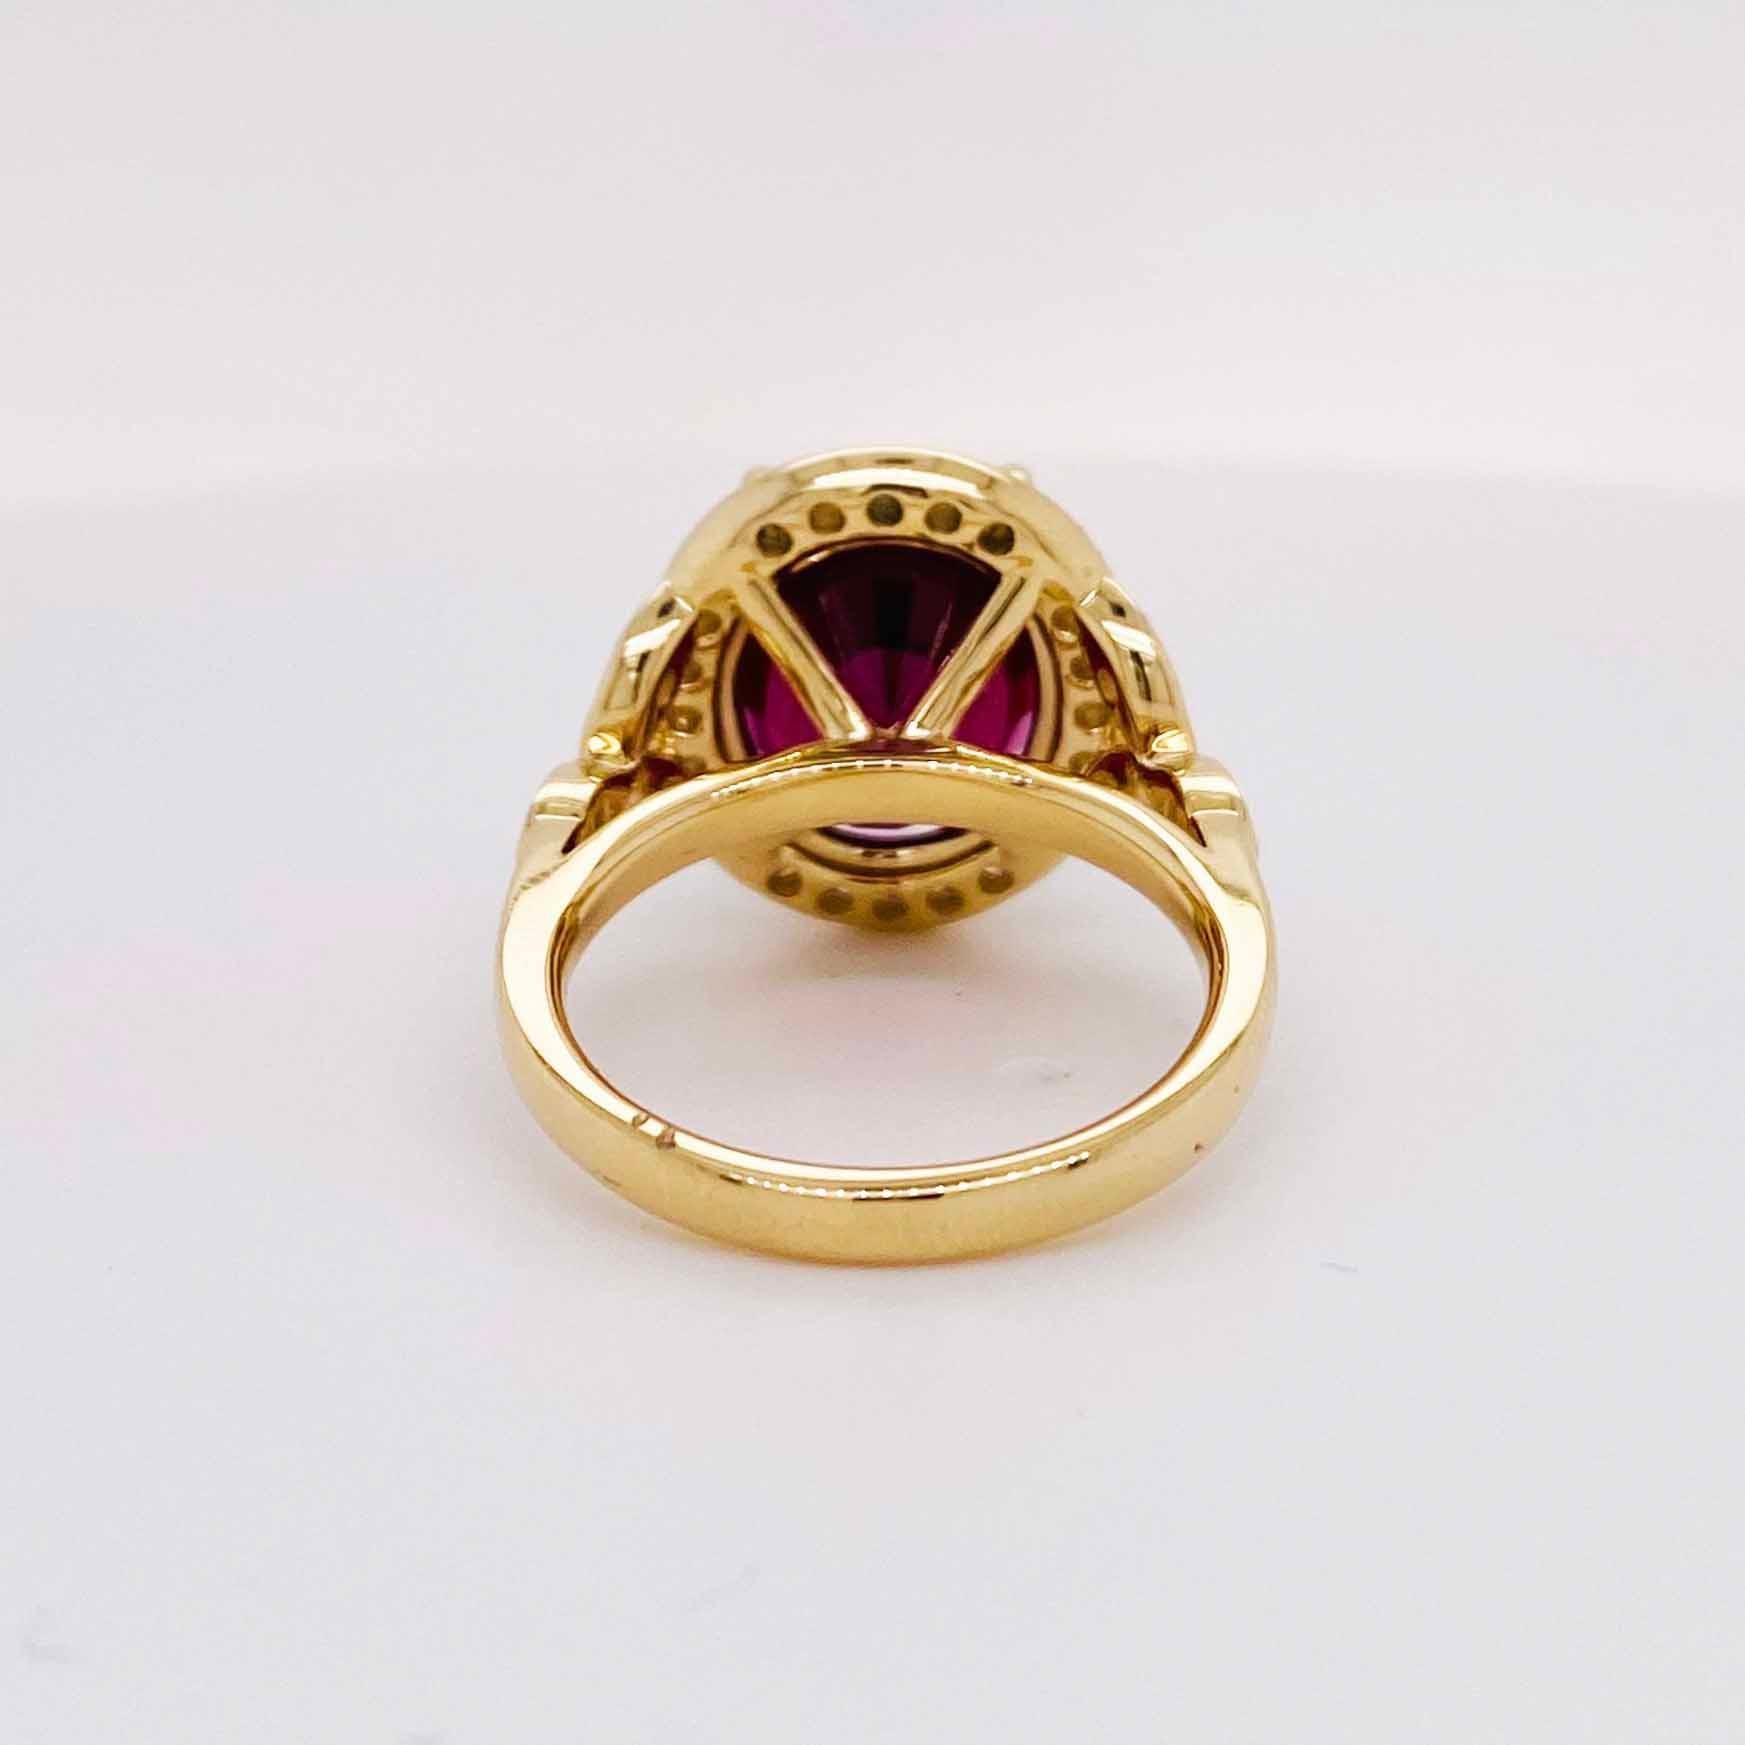 For Sale:  Garnet Diamond Ring, Yellow Gold, One-of-a-Kind 9.37Ct Garnet and Diamond Halo 3